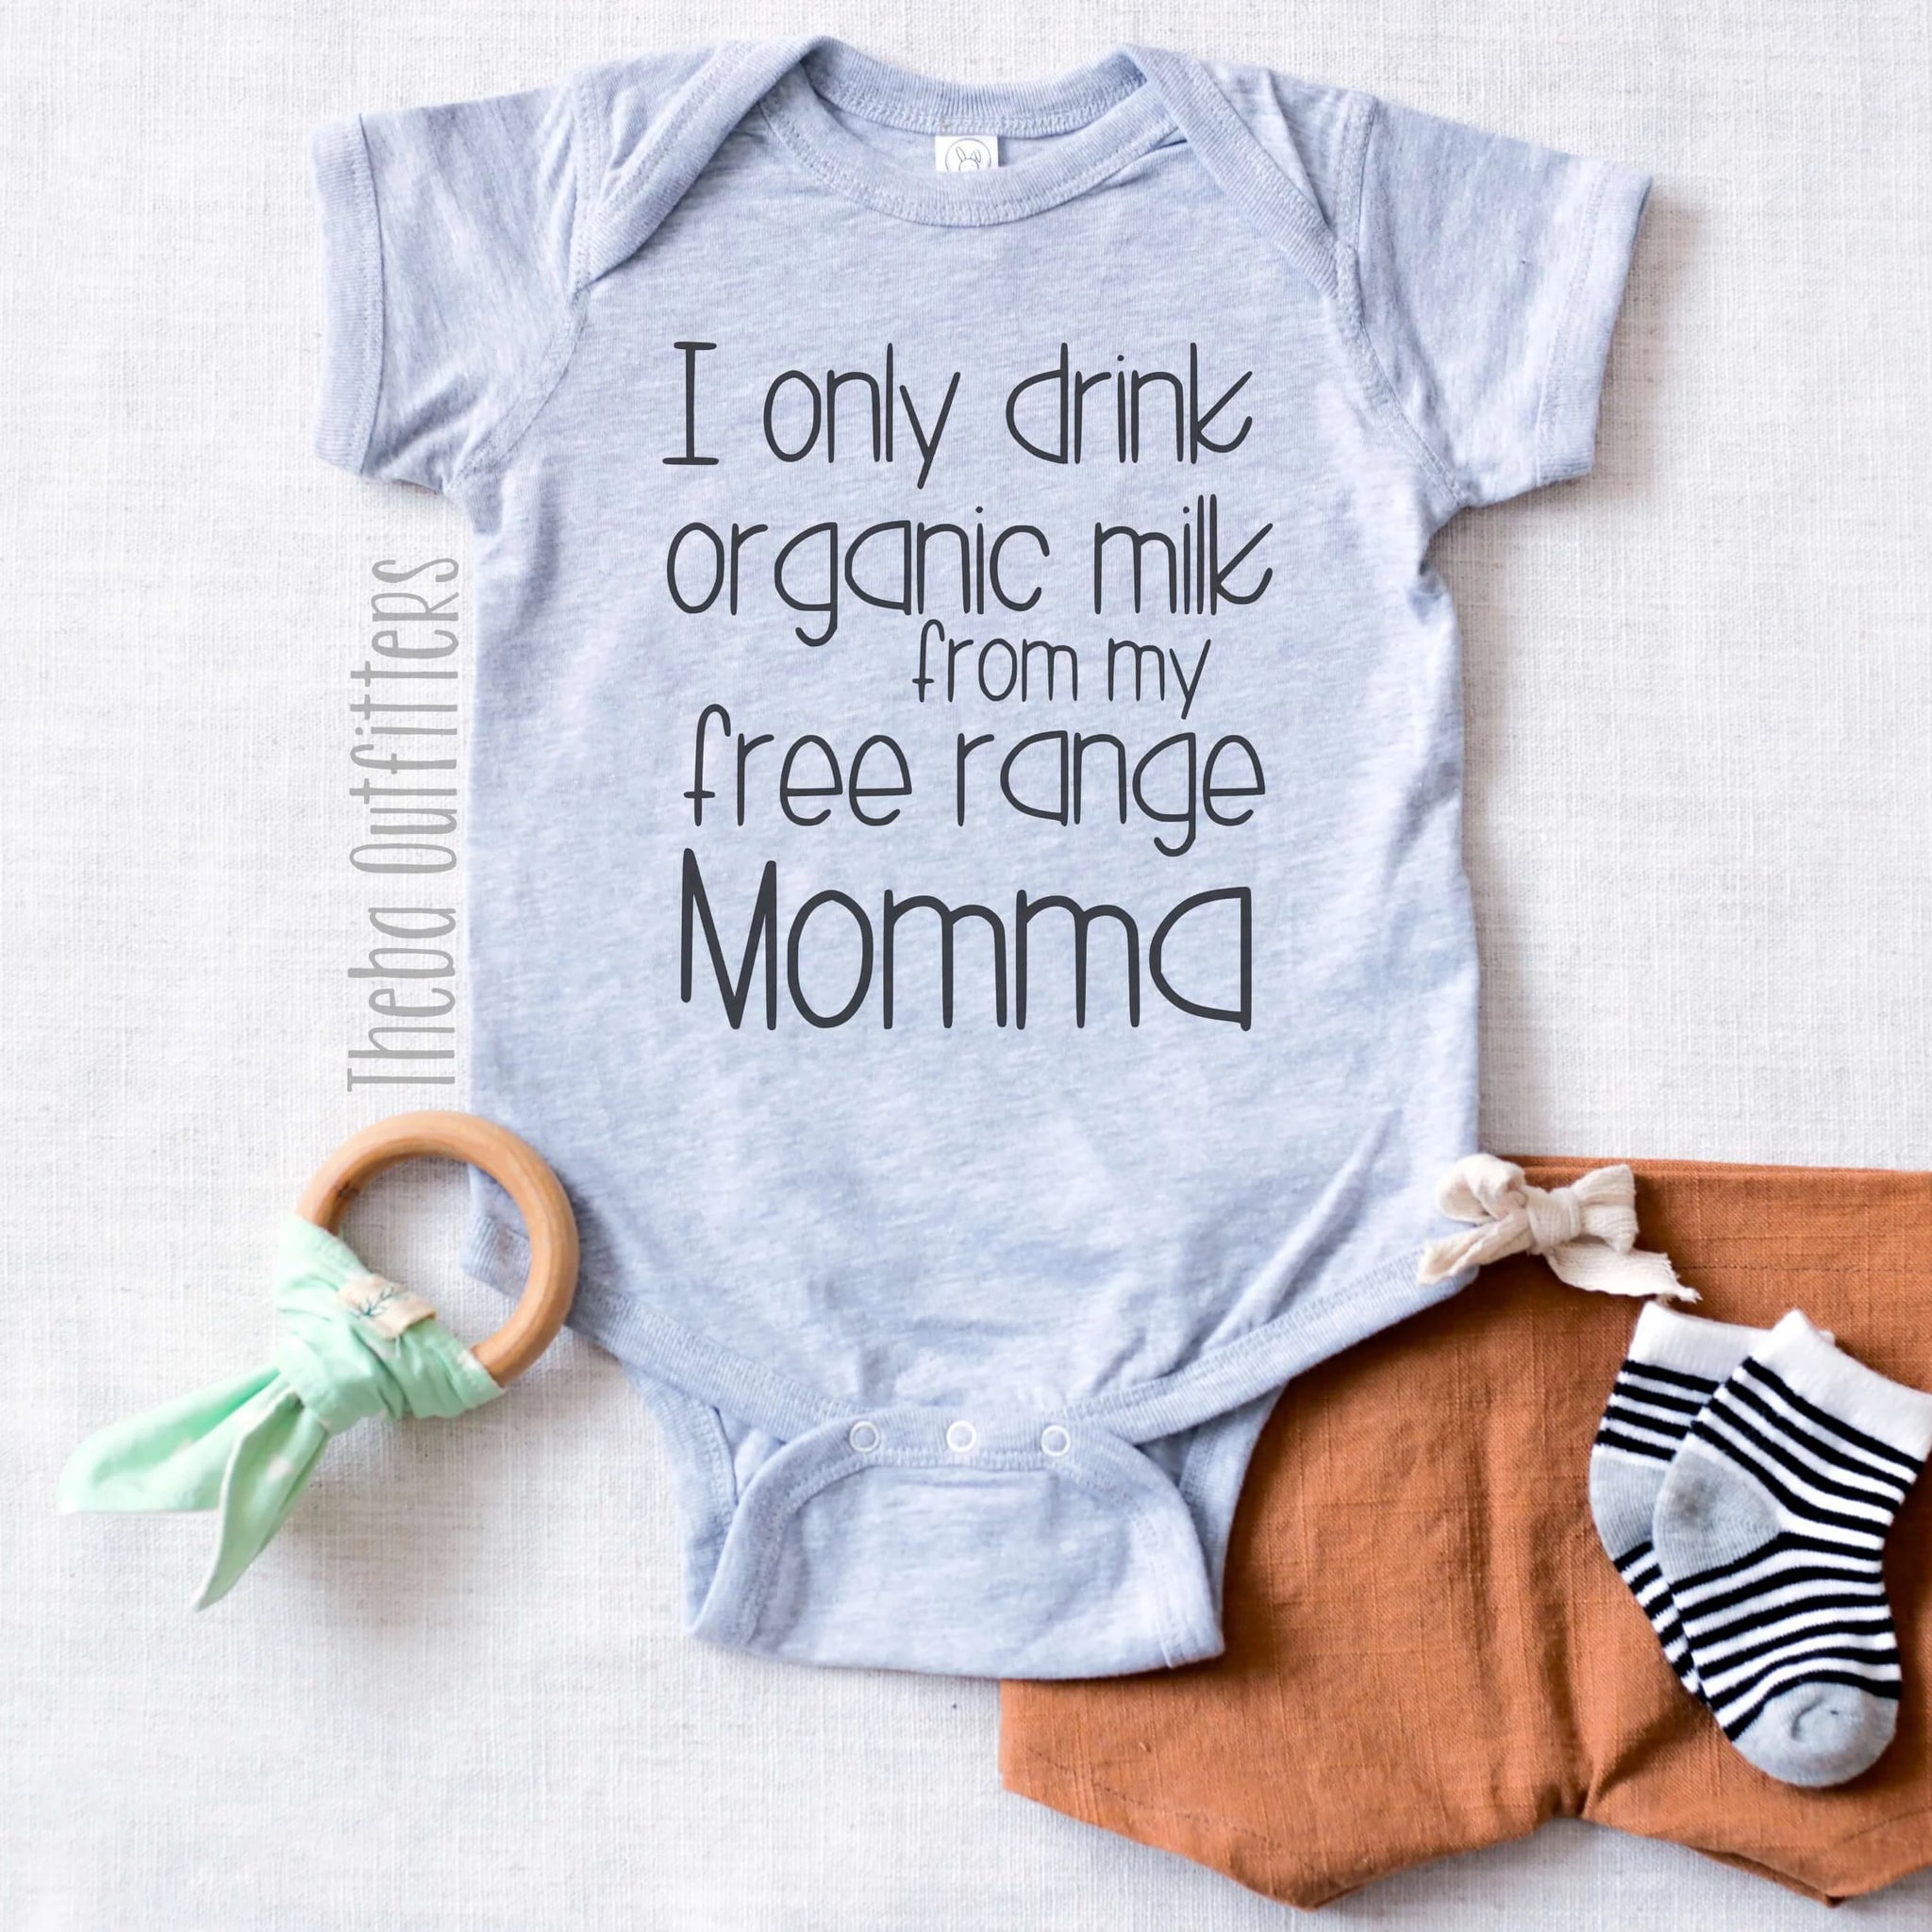 'I only drink organic milk from my free range Mama' Onesie Bodysuit Baby Infant Theba Outfitters